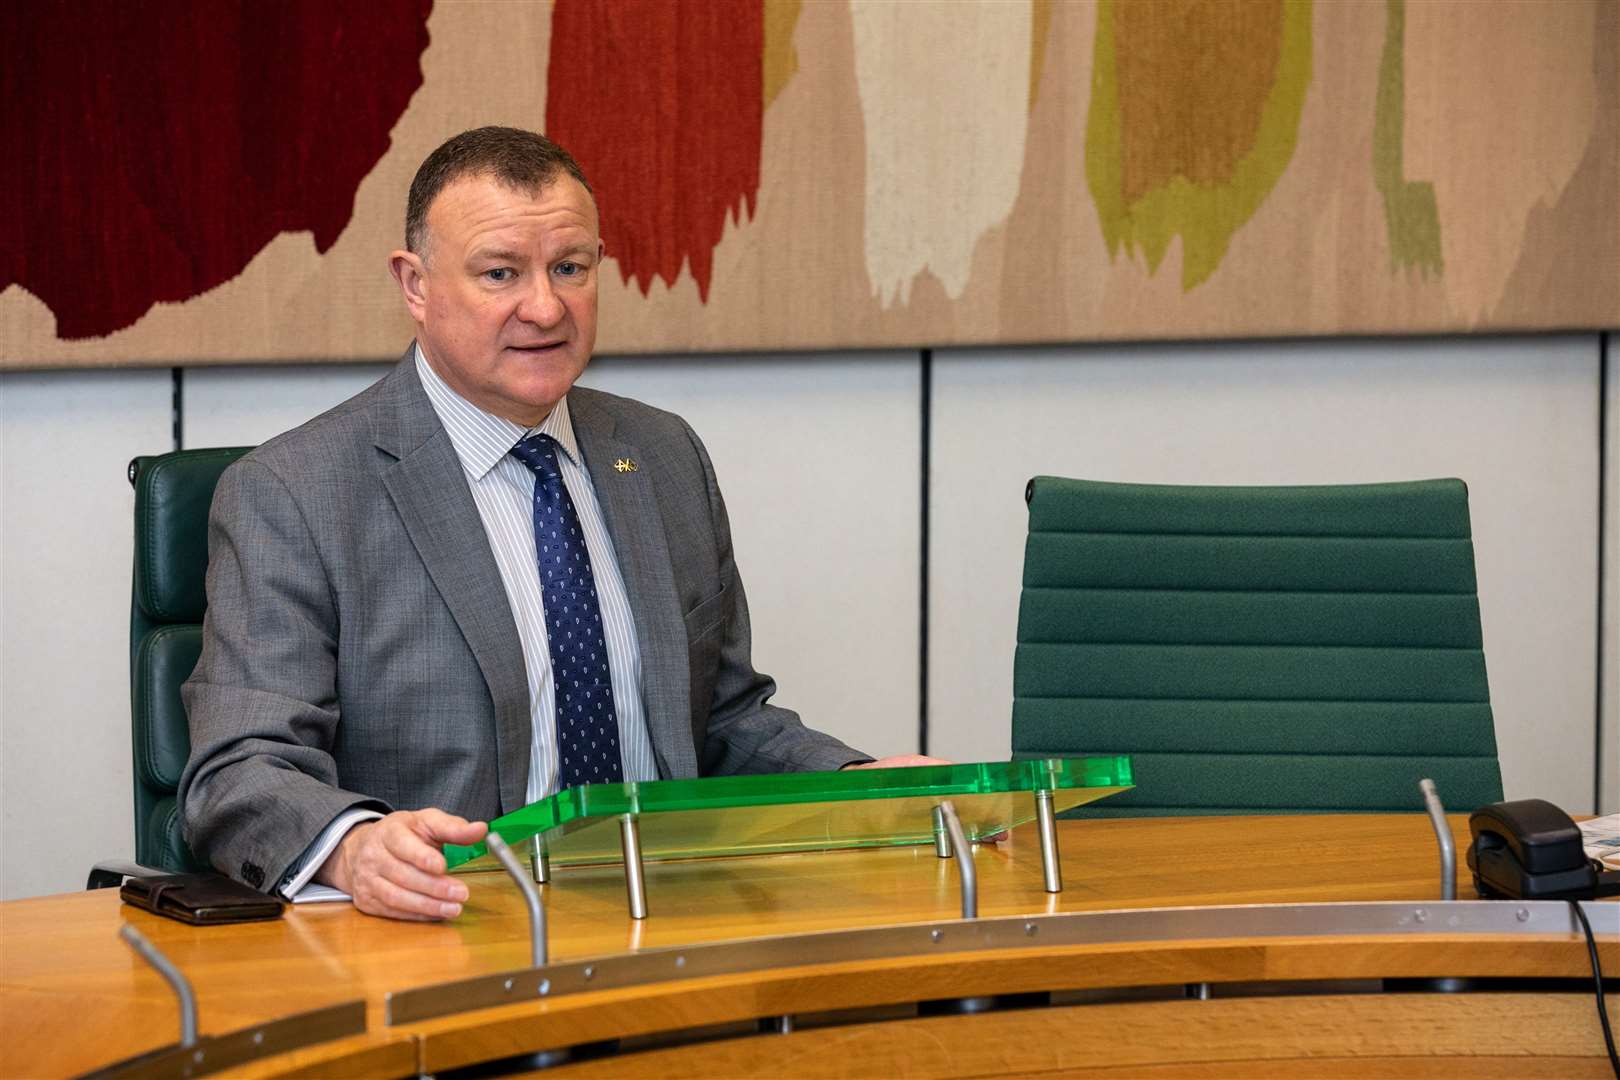 MP Drew Hendry at Westminster,